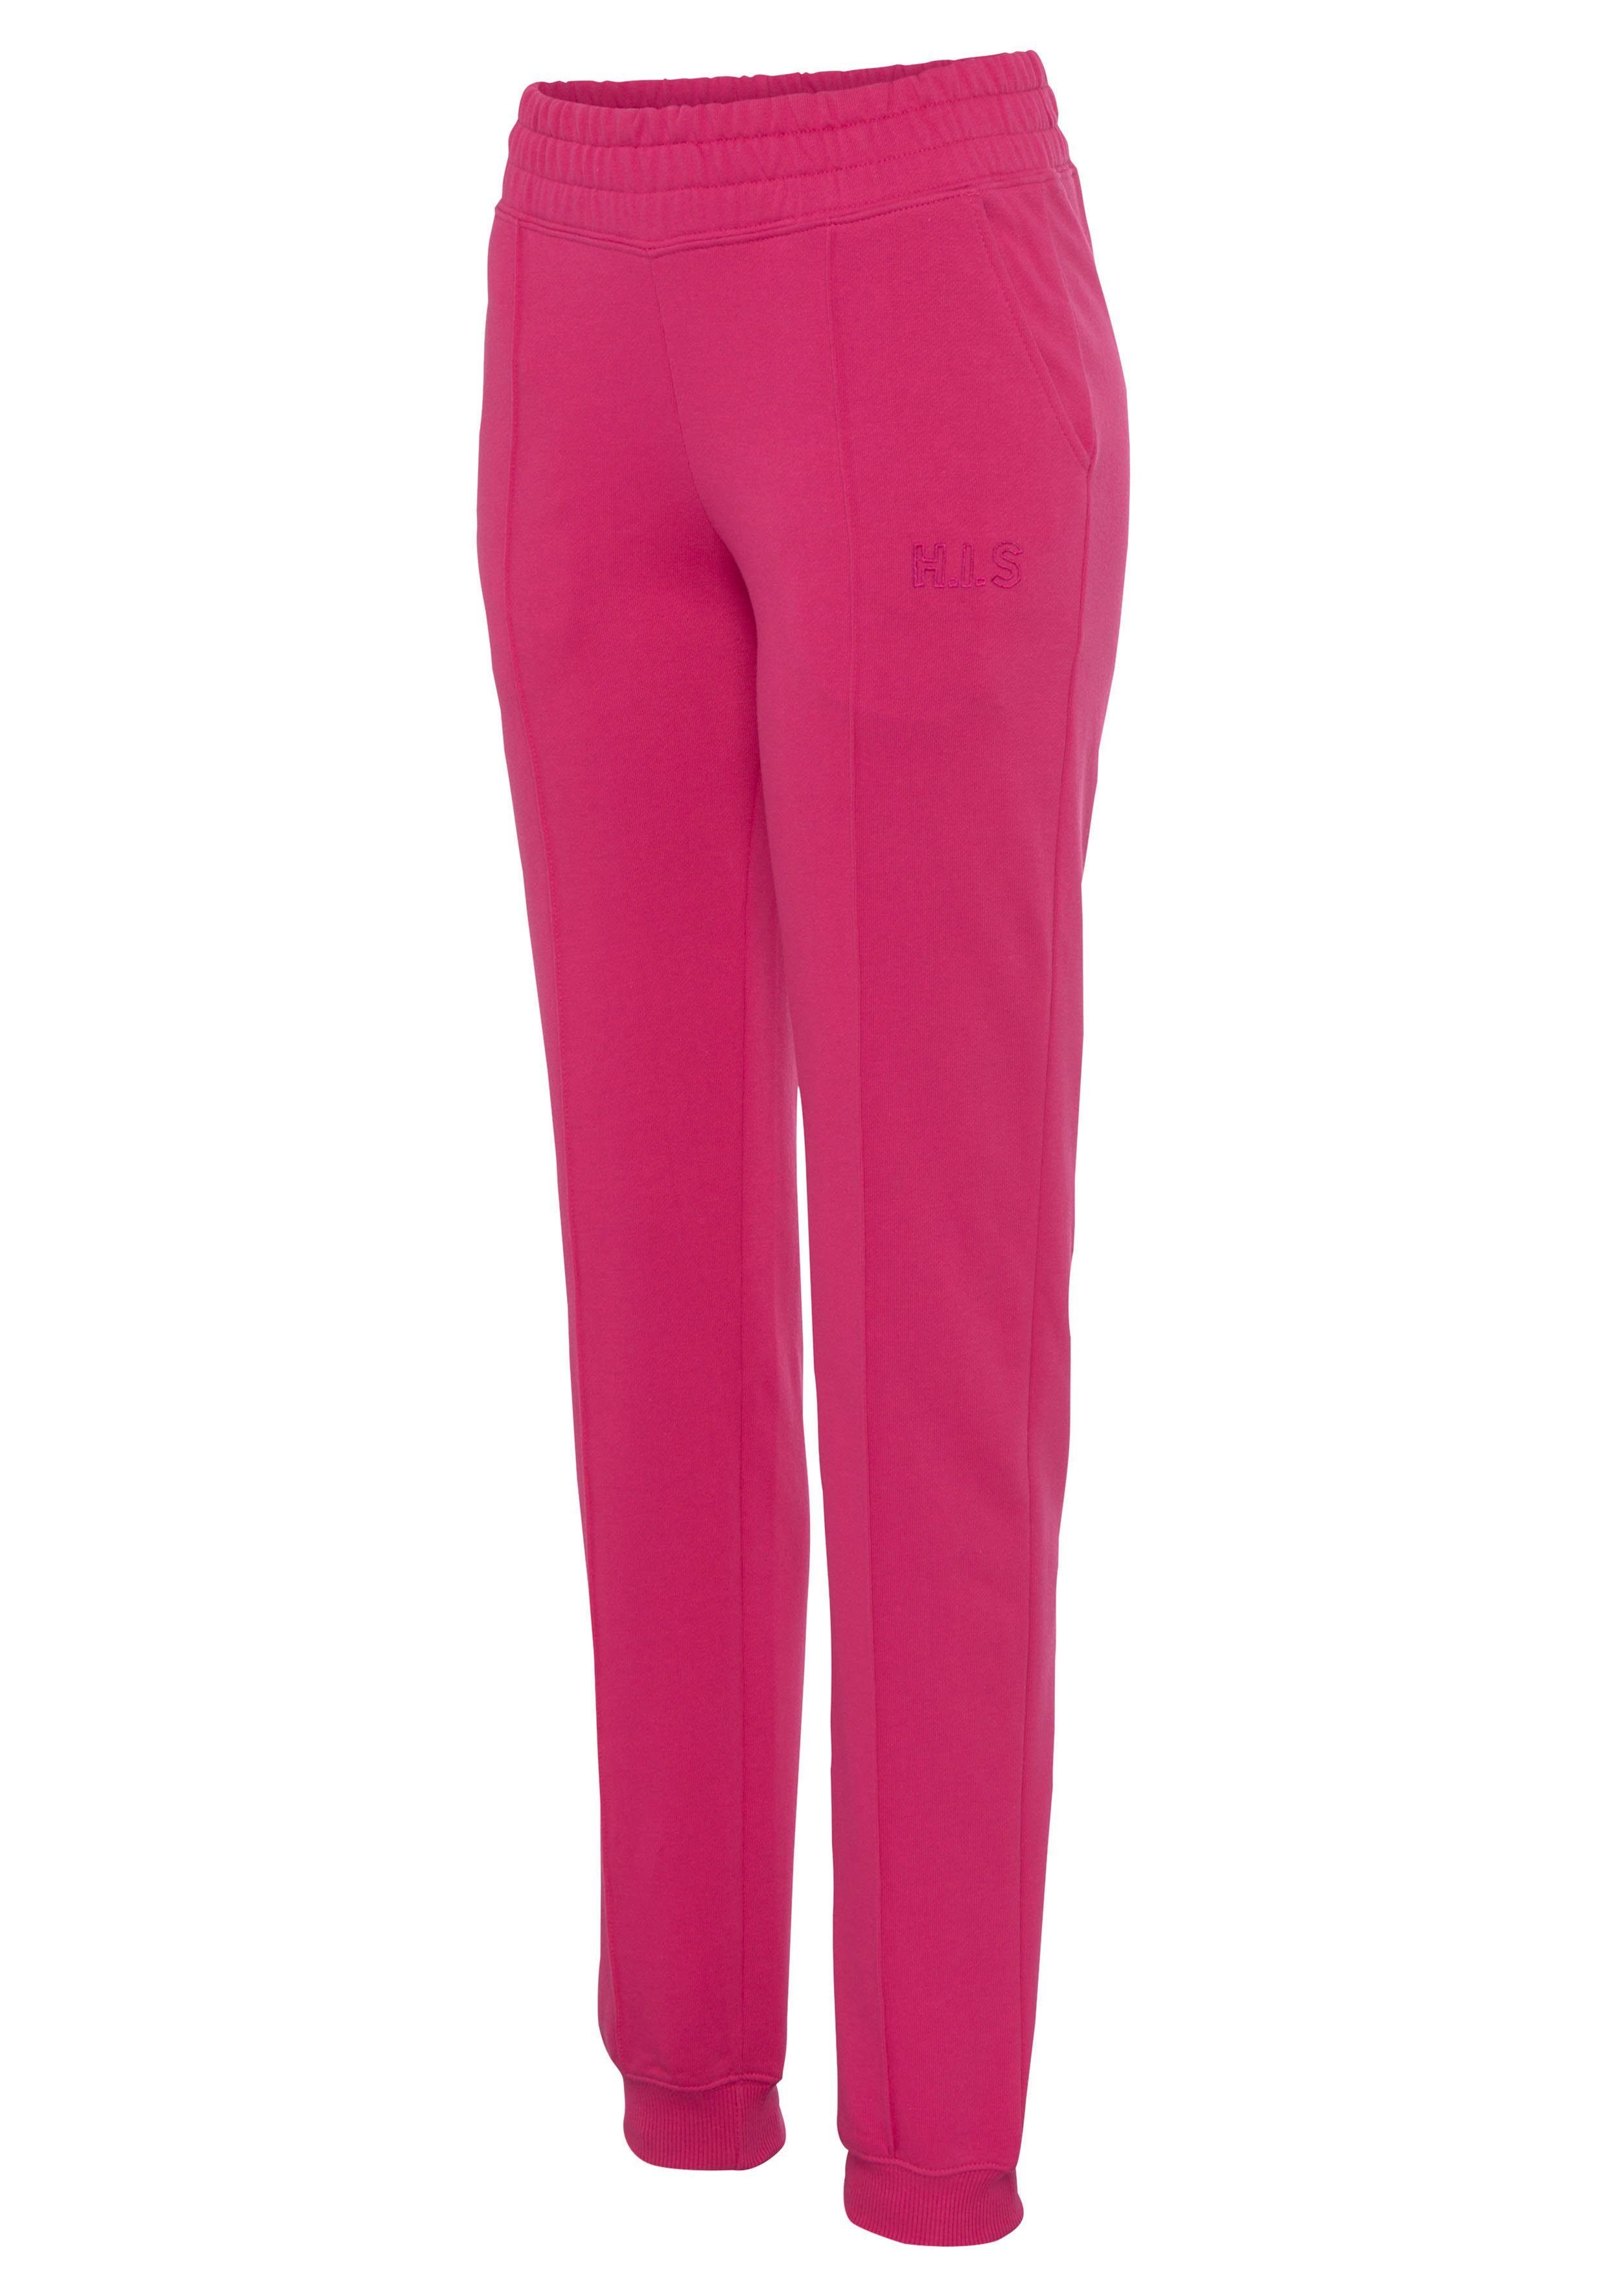 H.I.S Relaxhose mit Piping pink vorn, Loungeanzug